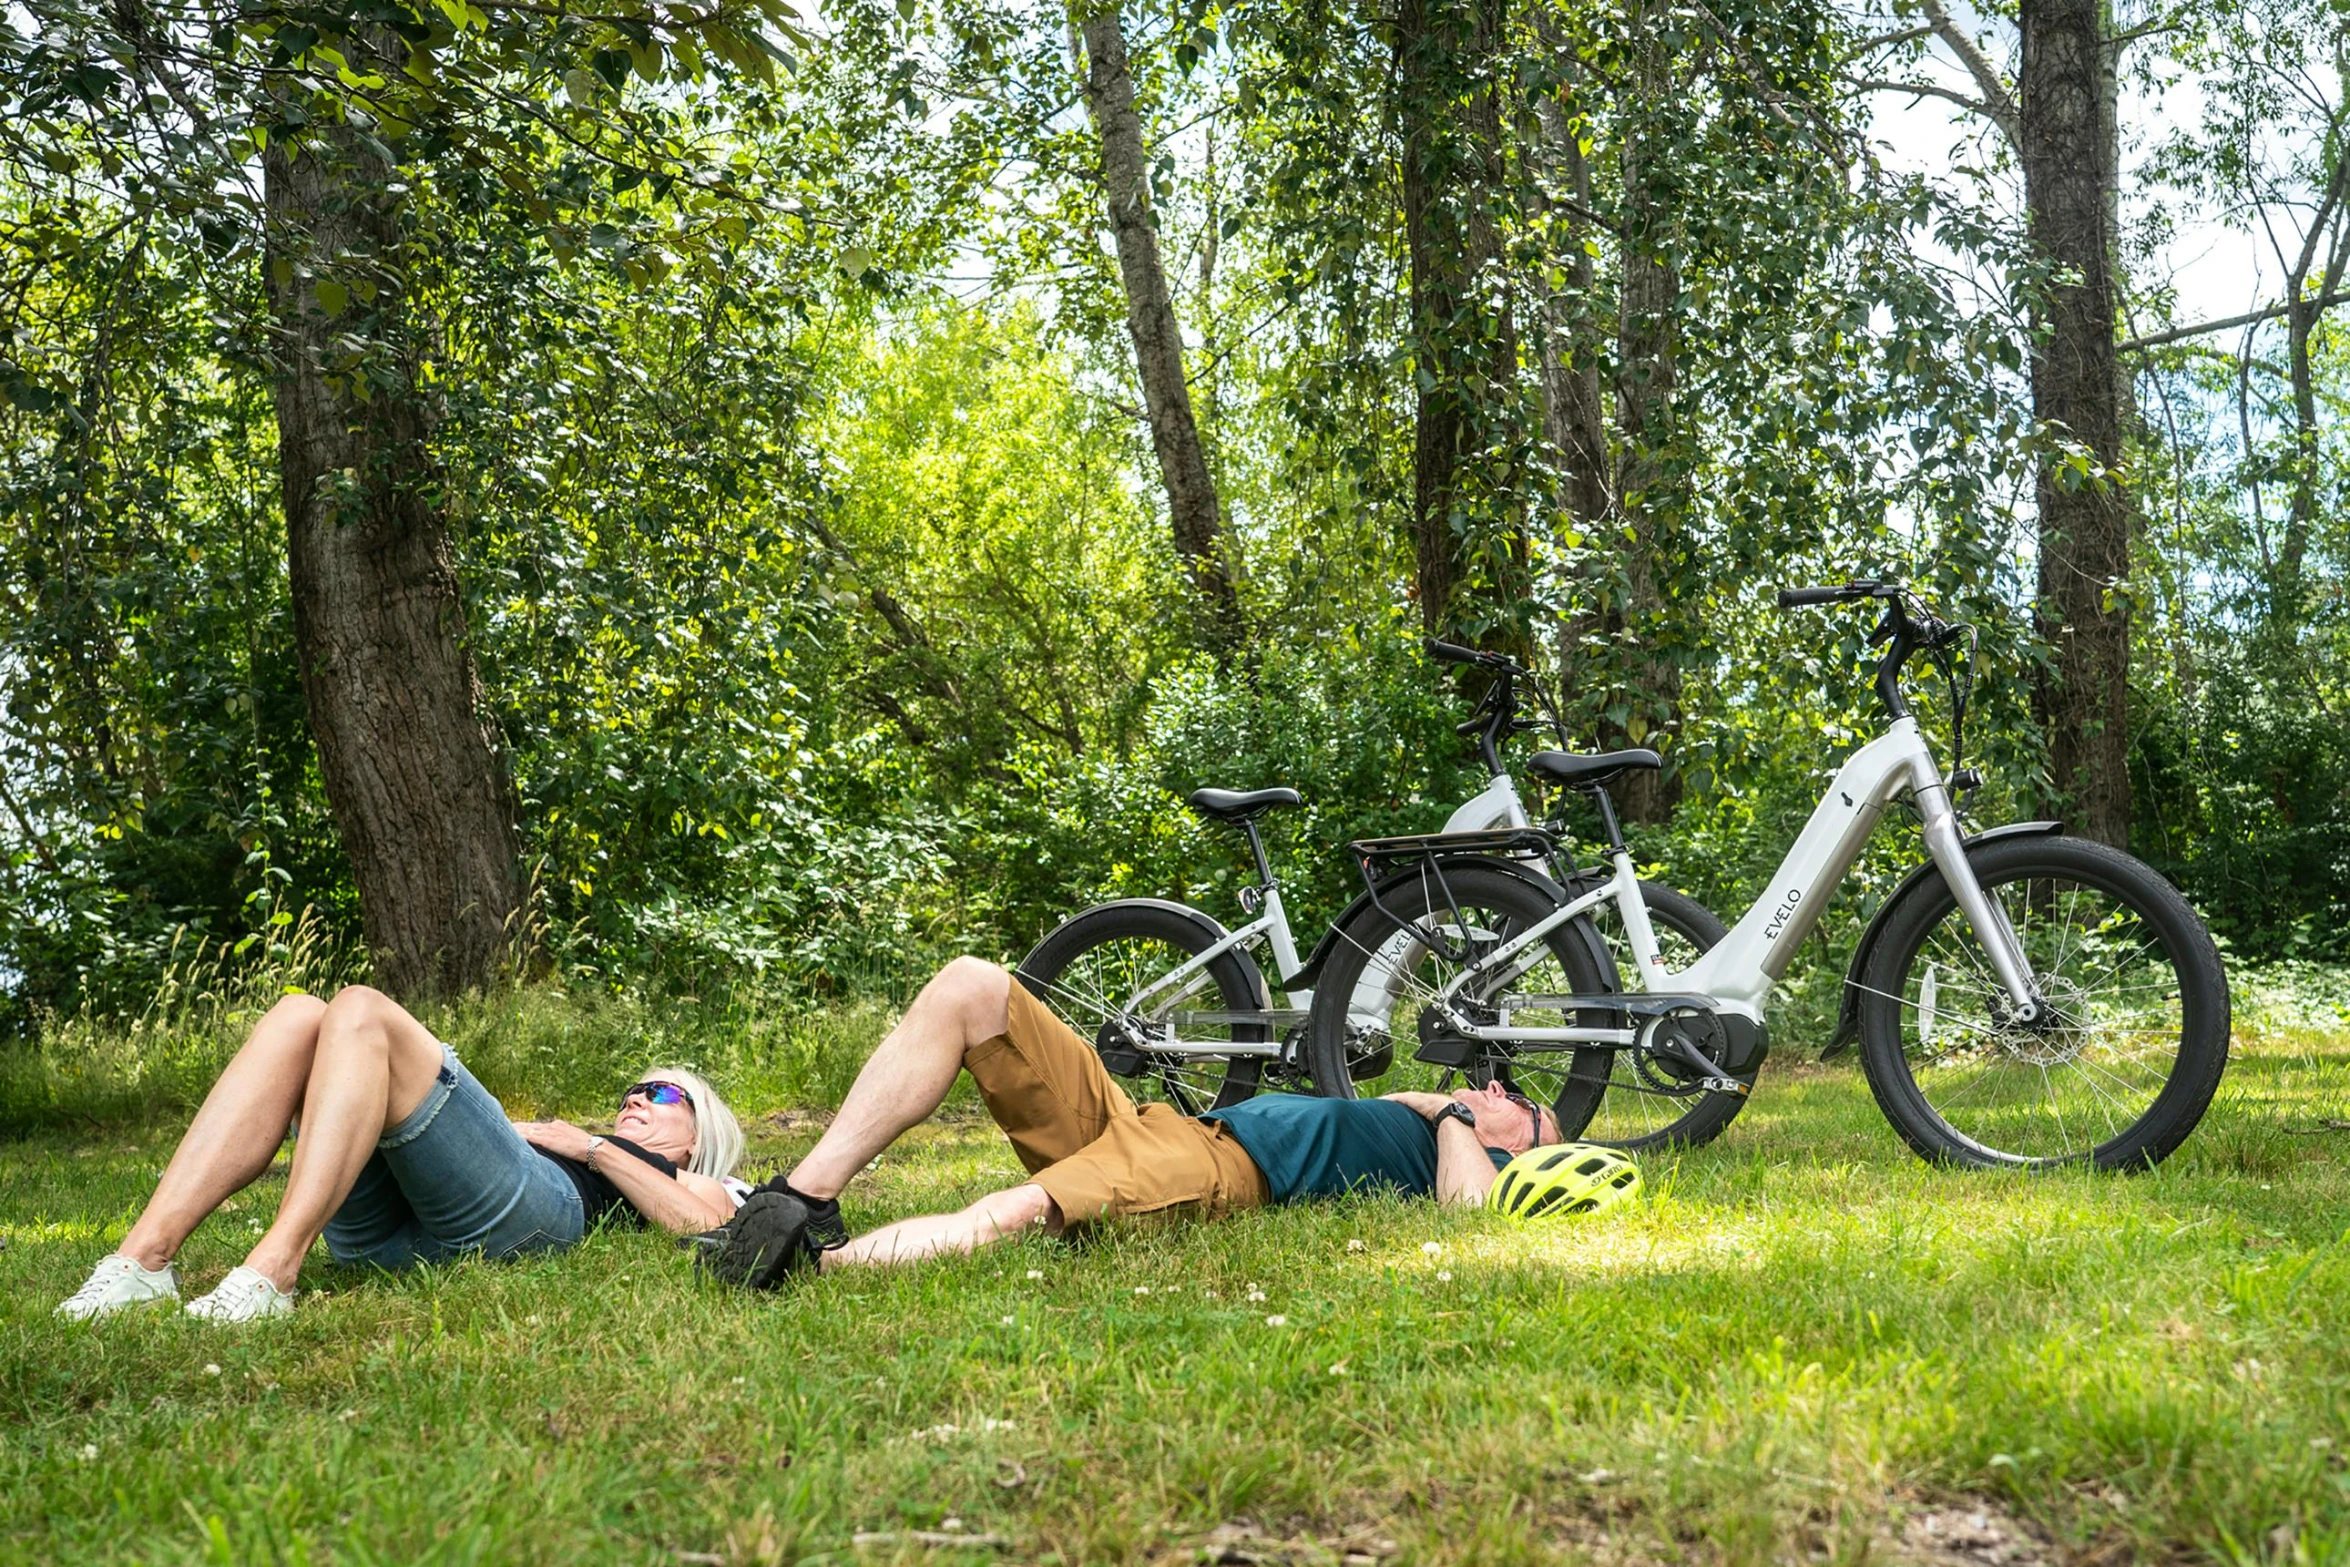 two people laying on the grass with a bike in the background